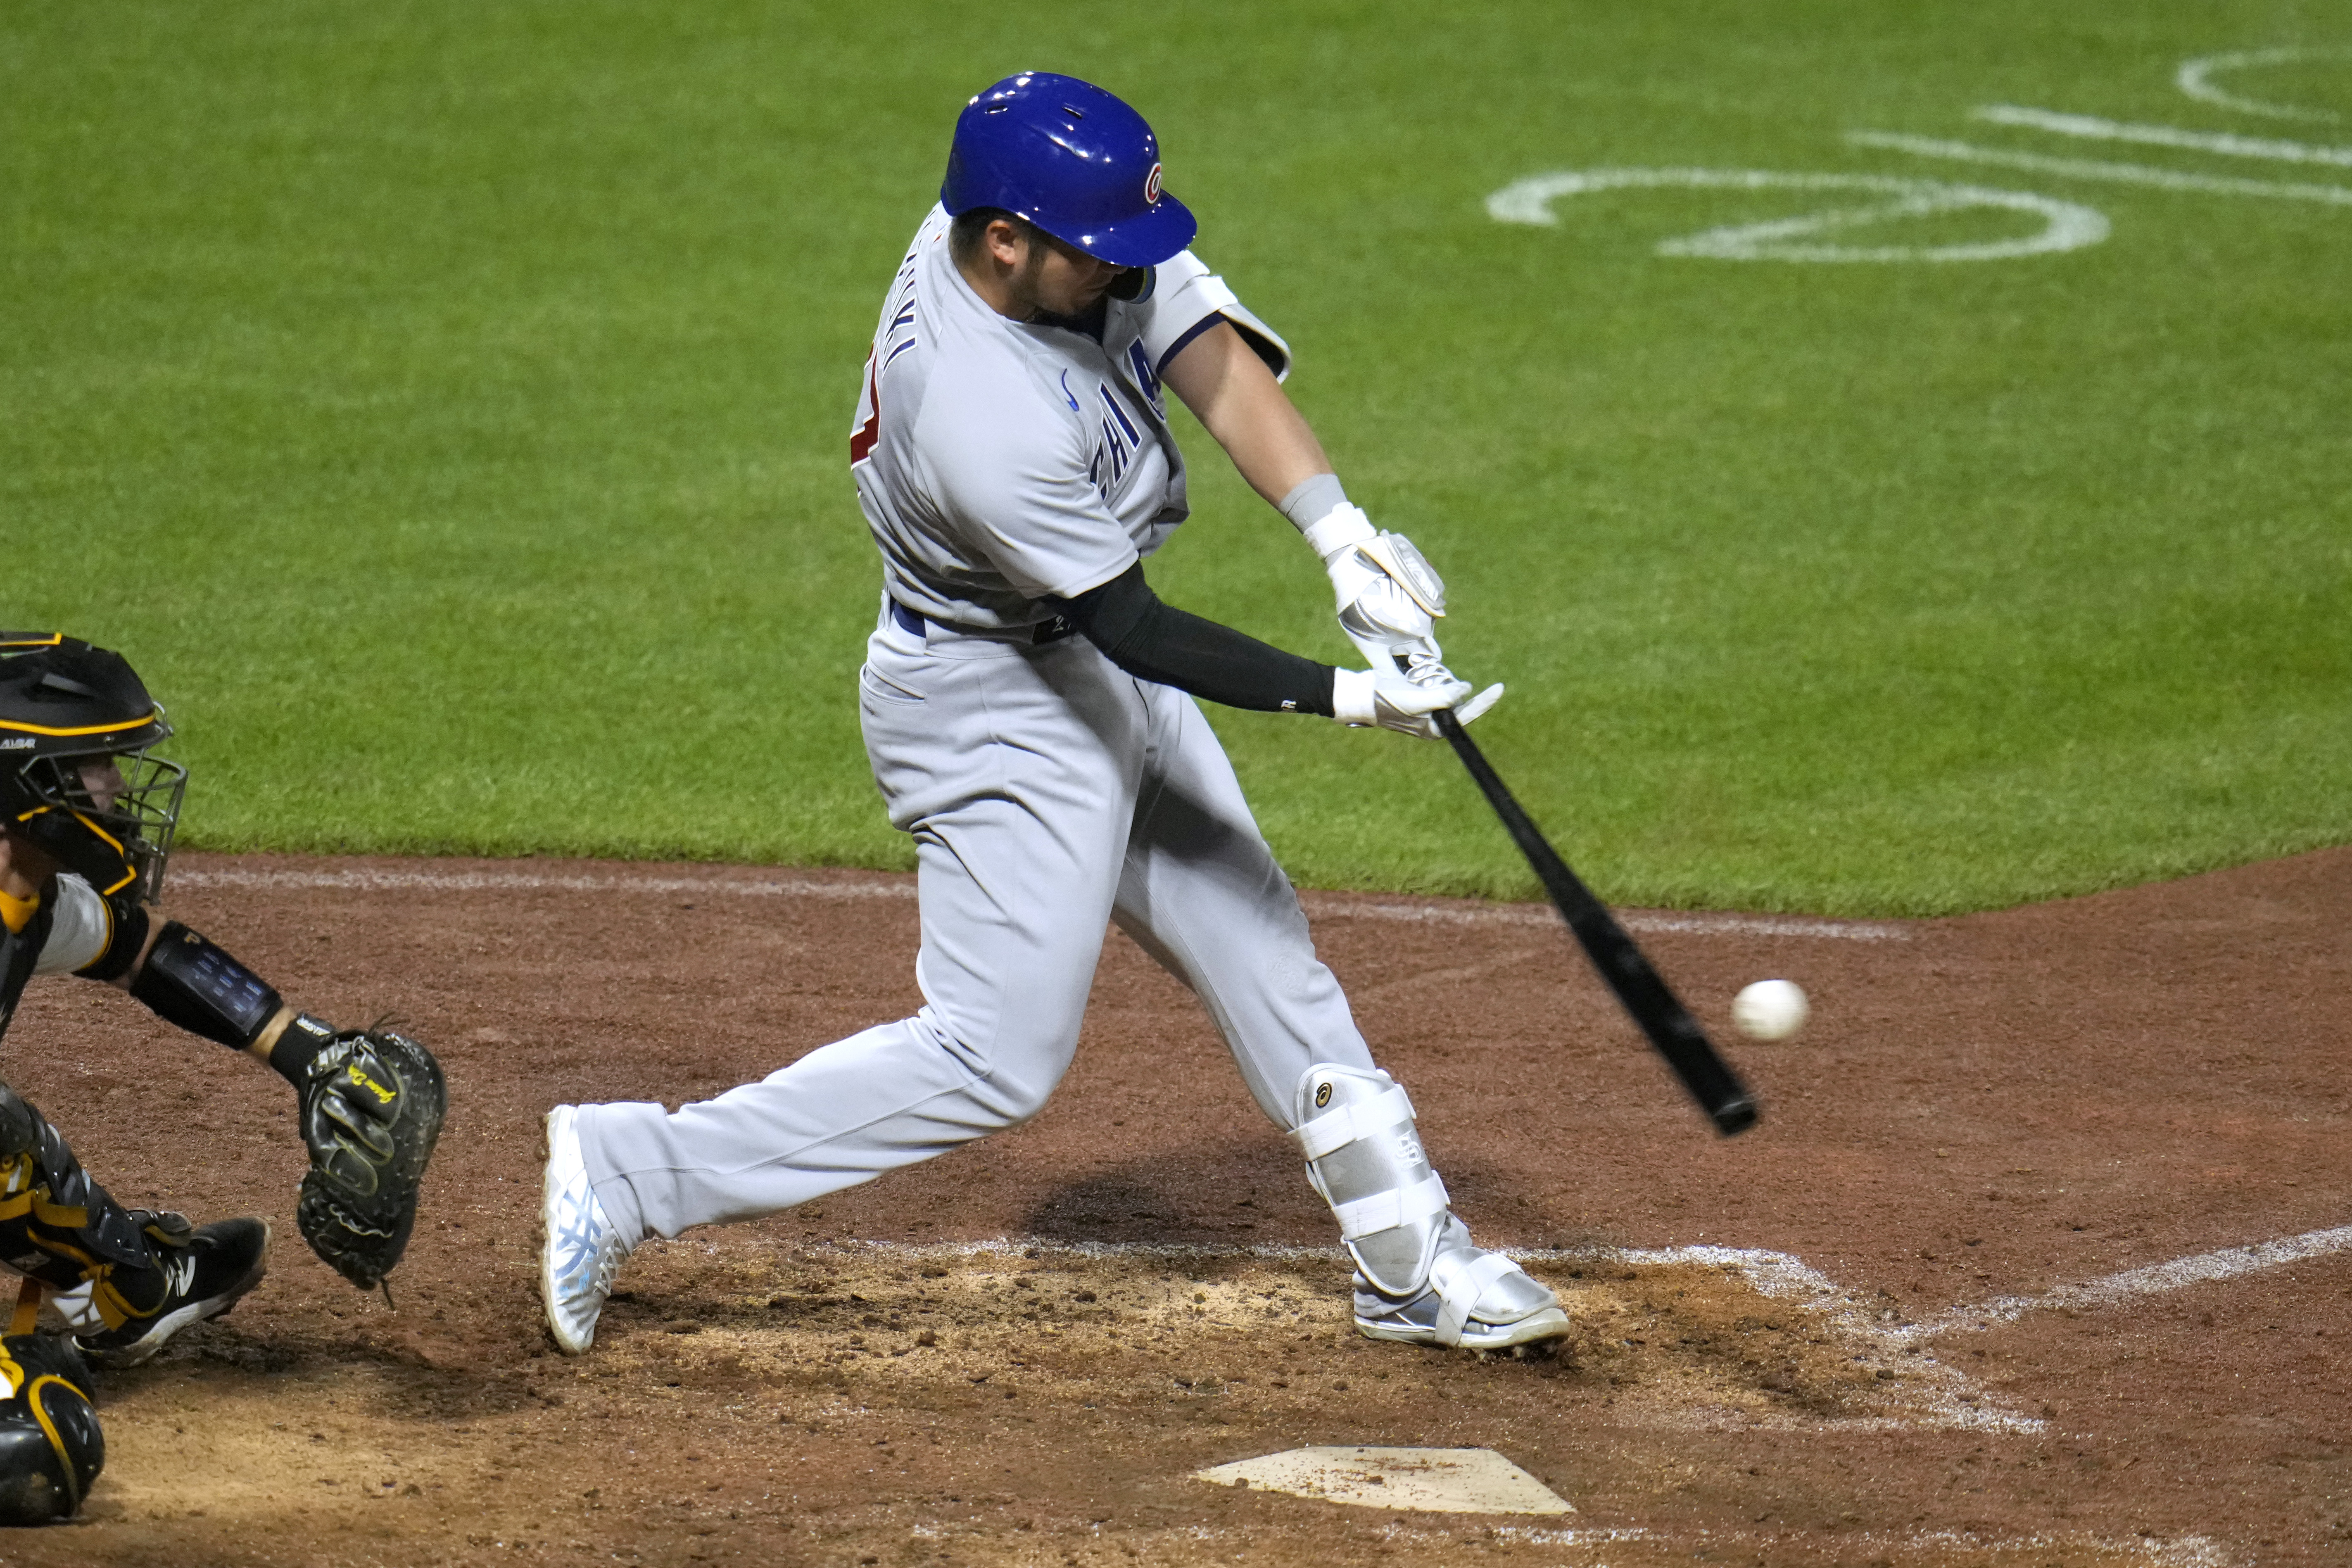 Chicago Cubs vs. Pittsburgh Pirates preview, Thursday 6/23, 11:35